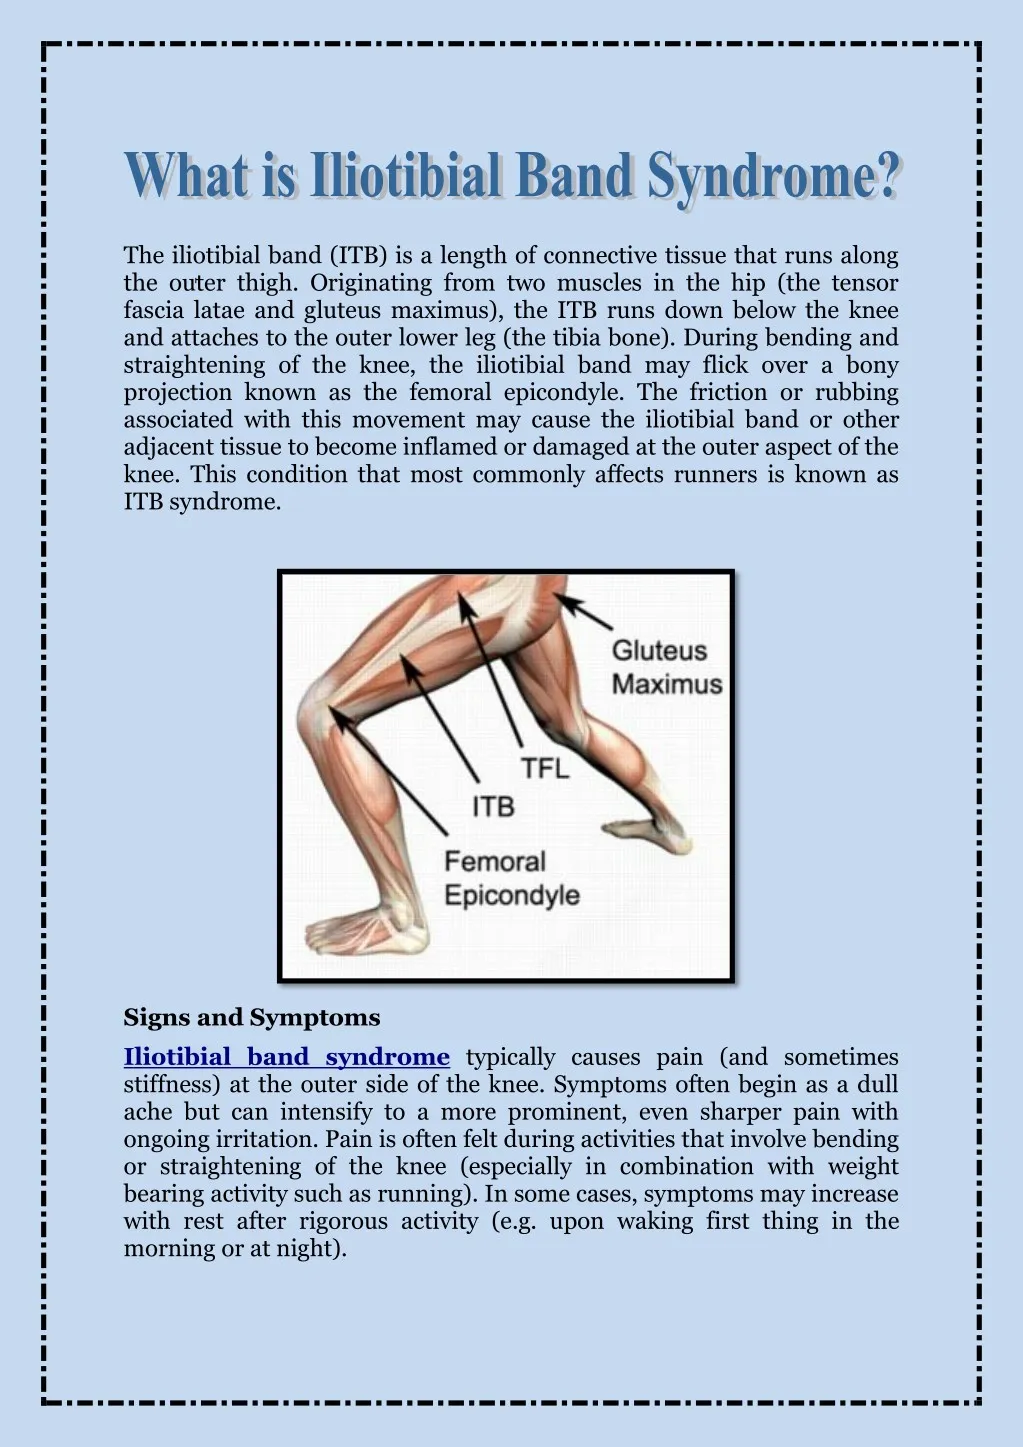 the iliotibial band itb is a length of connective